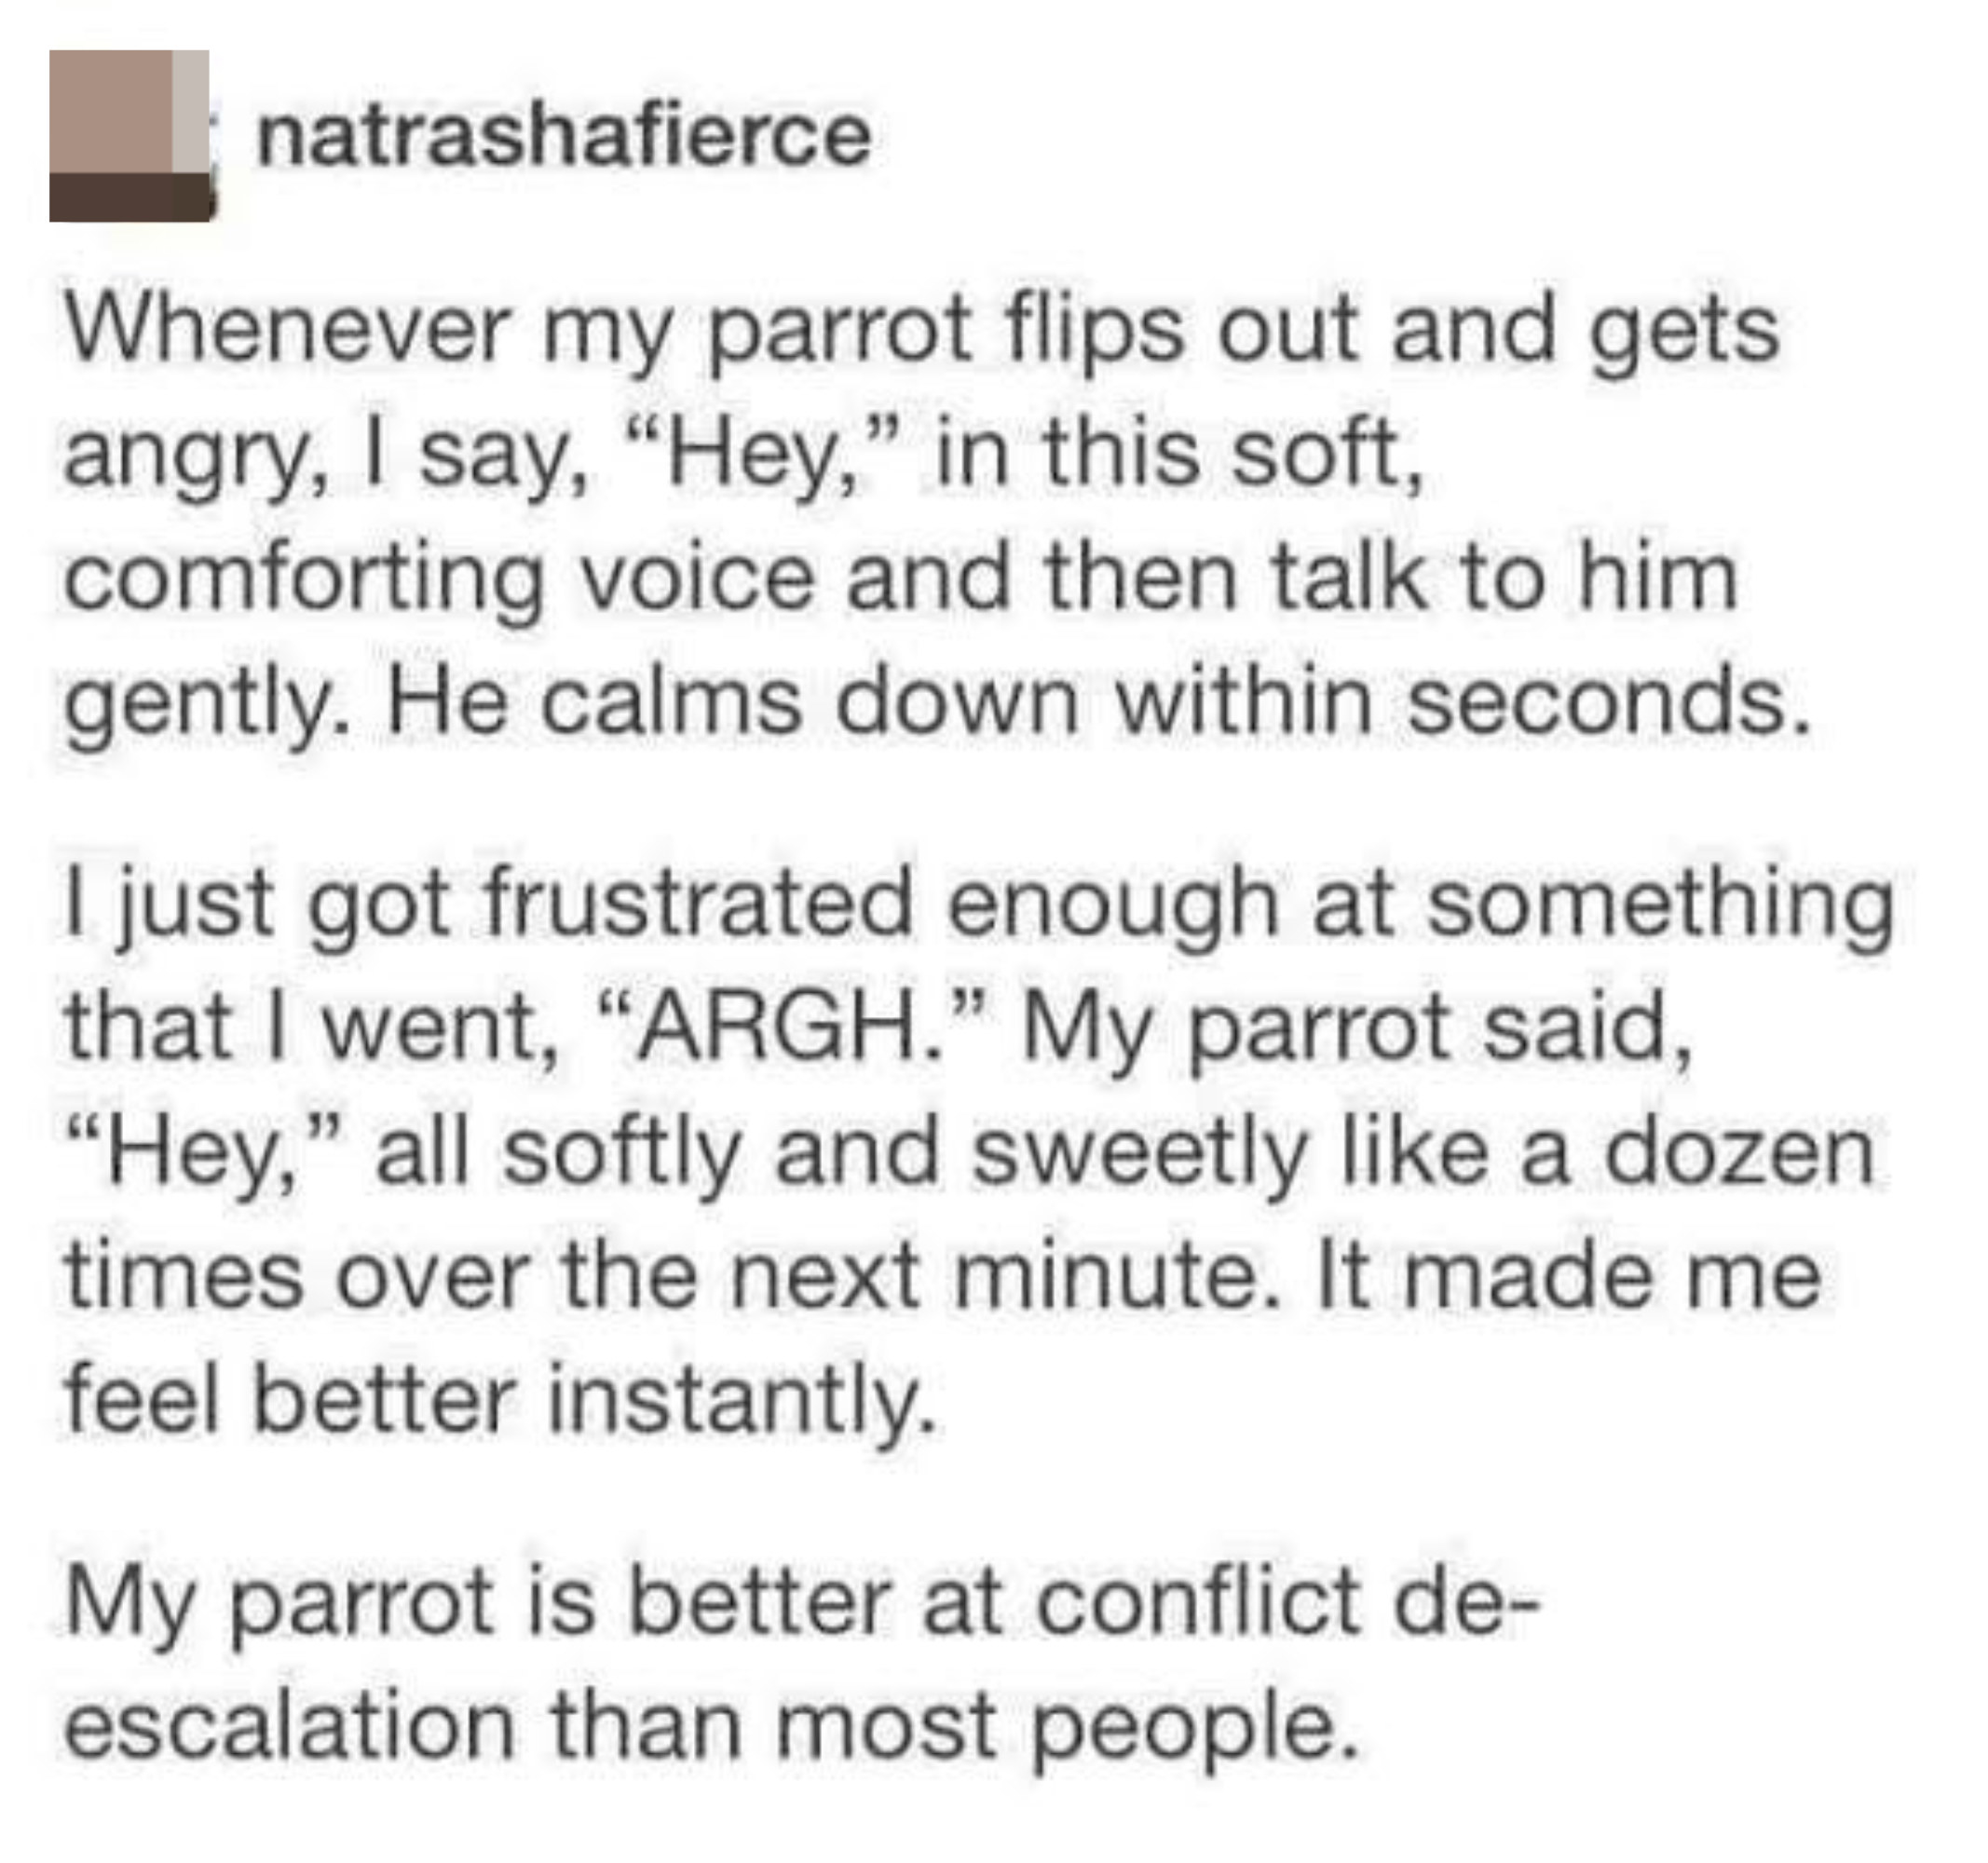 parrot who is good at conflict deescalation